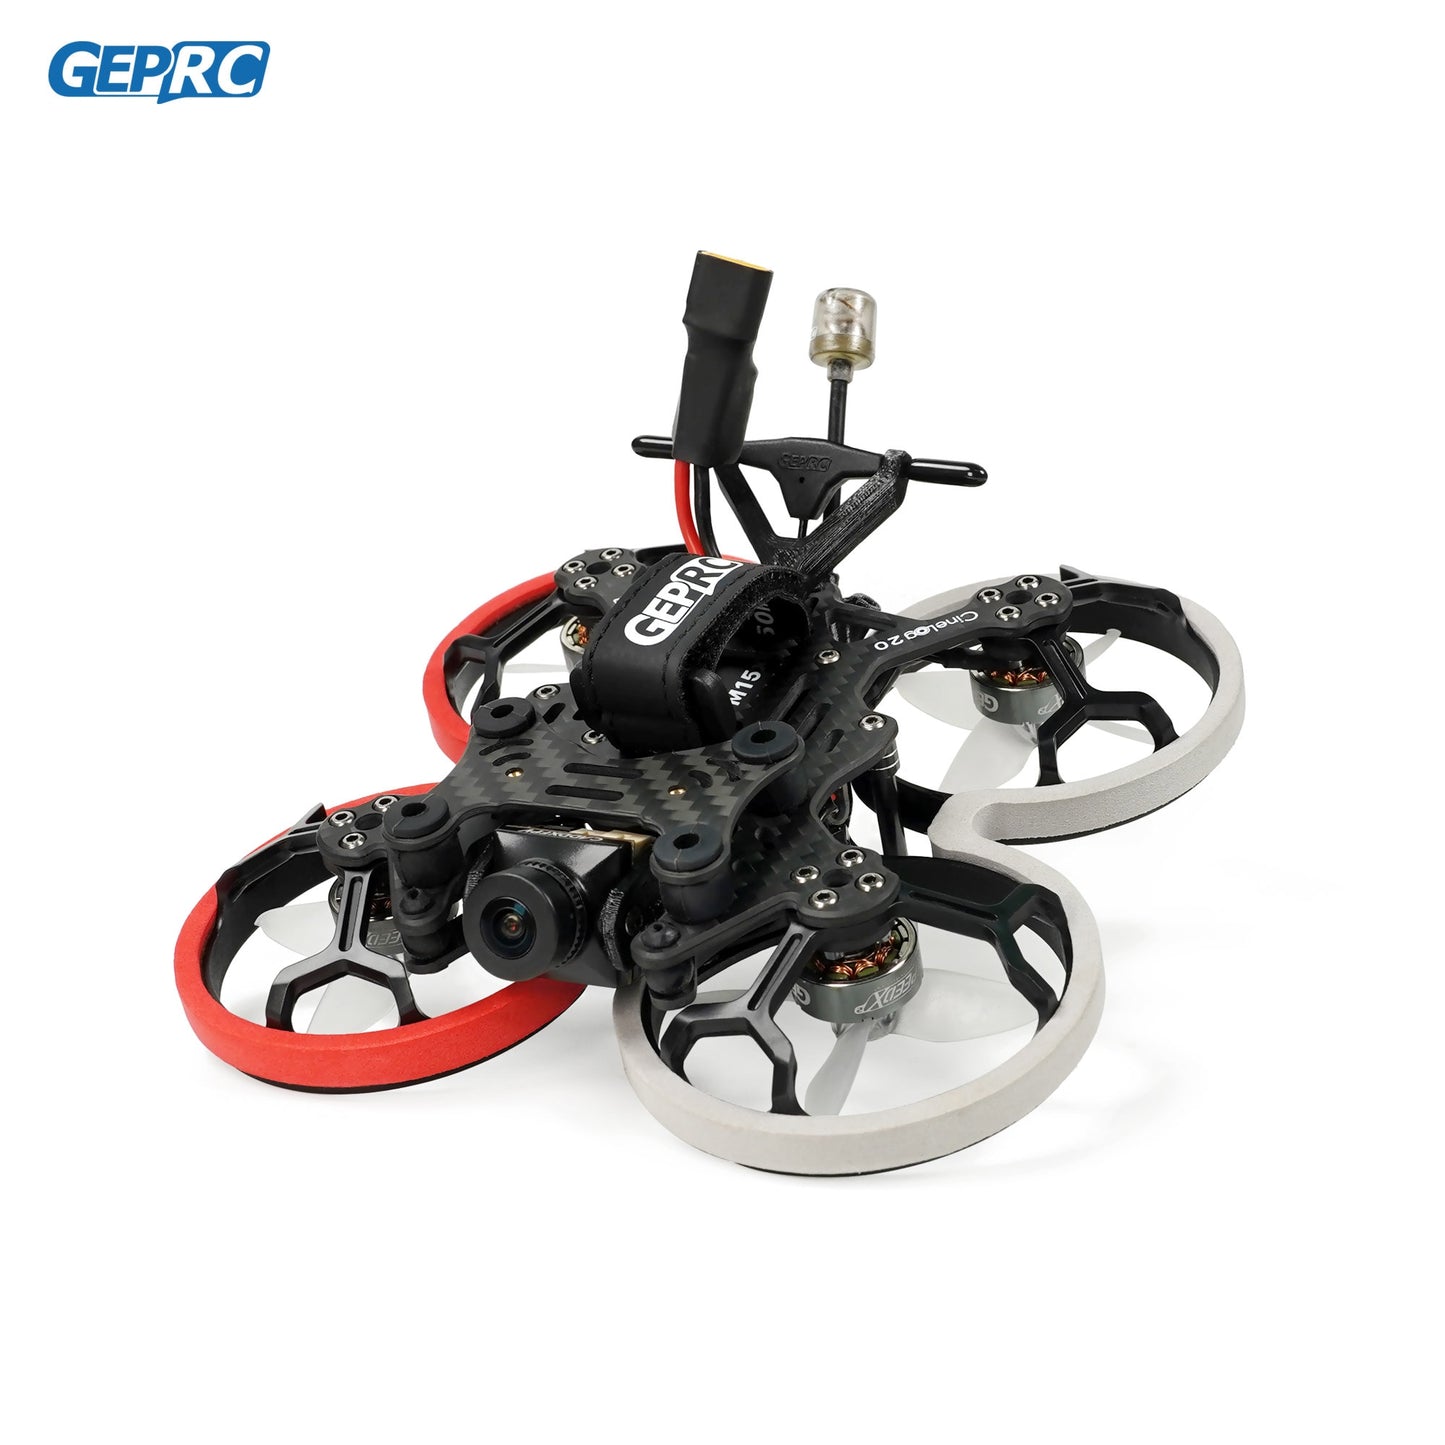 GEPRC Cinelog20 Analog FPV Drone - 2inch GEP-F411-35A AIO Caddx Ratel2 Cinewhoop 5500KV RC FPV Quadcopter Racing Freestyle Drone